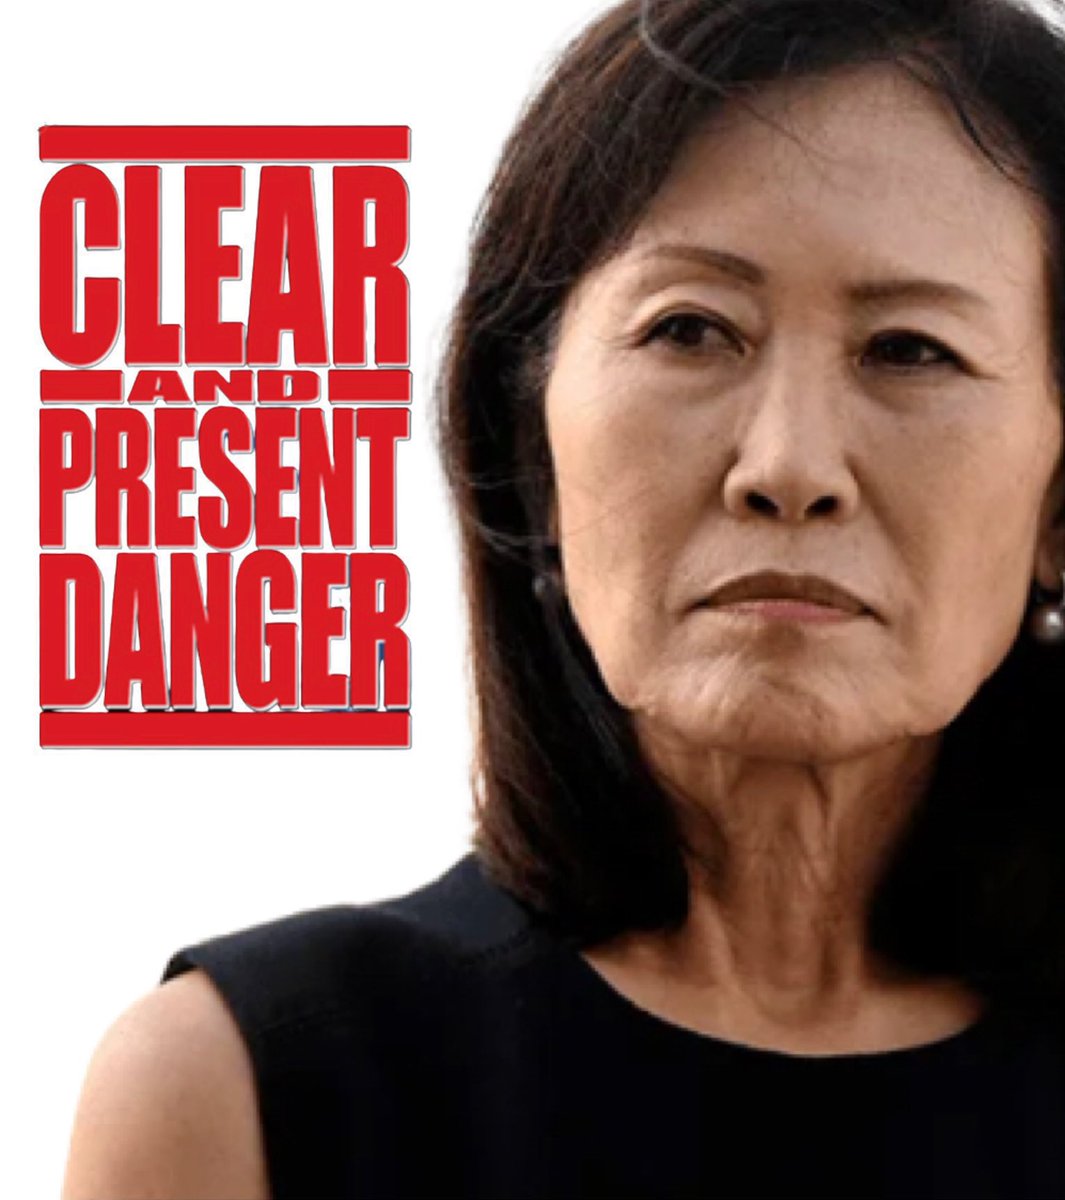 And to think Korean-American Rep Michelle Steel #CA45 endorsed this fool

Of course she did. Her husband also helped a CCP agent lobby the Trump White House to end US deployments in the South China Sea

Steel is a #ClearAndPresentDanger  

Elect @derektranCA45 instead